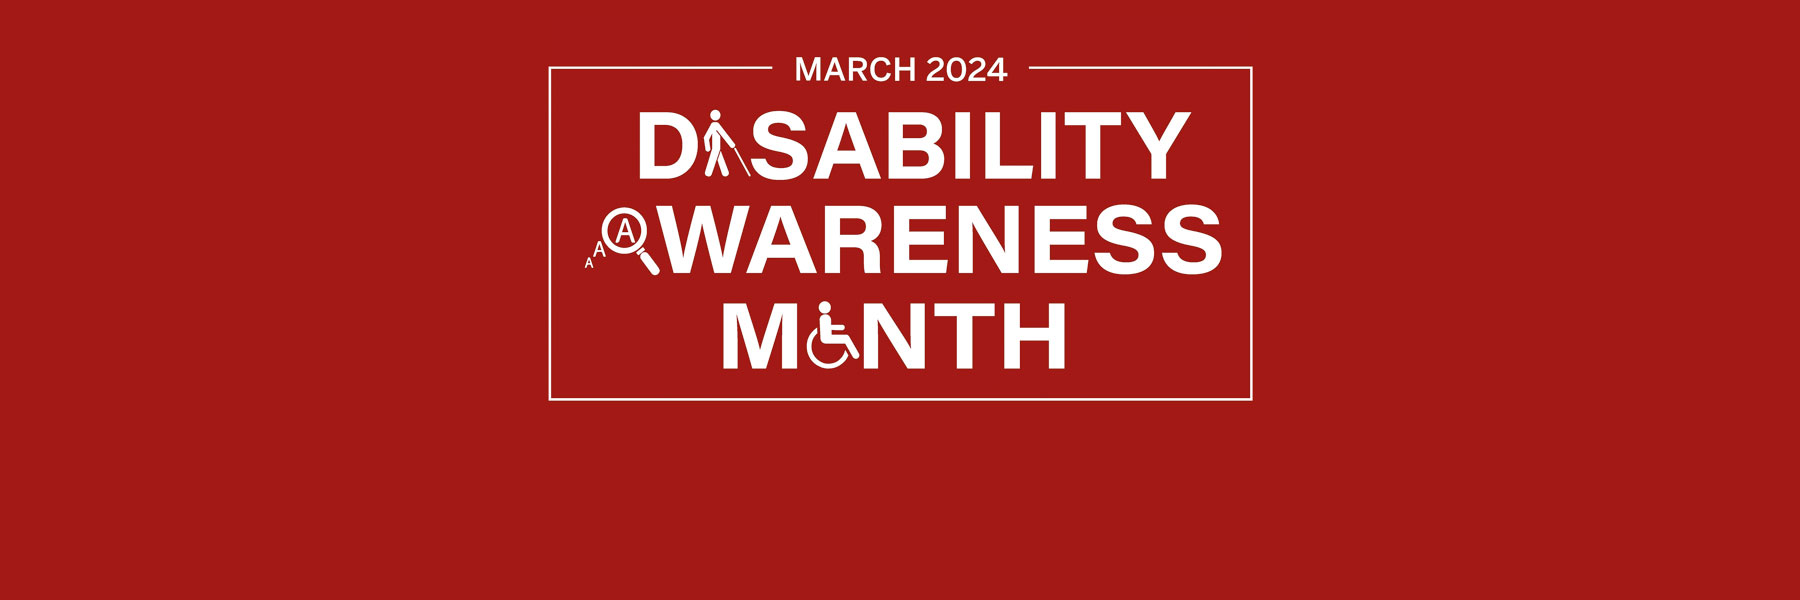 March 2024 Disability Awareness Month